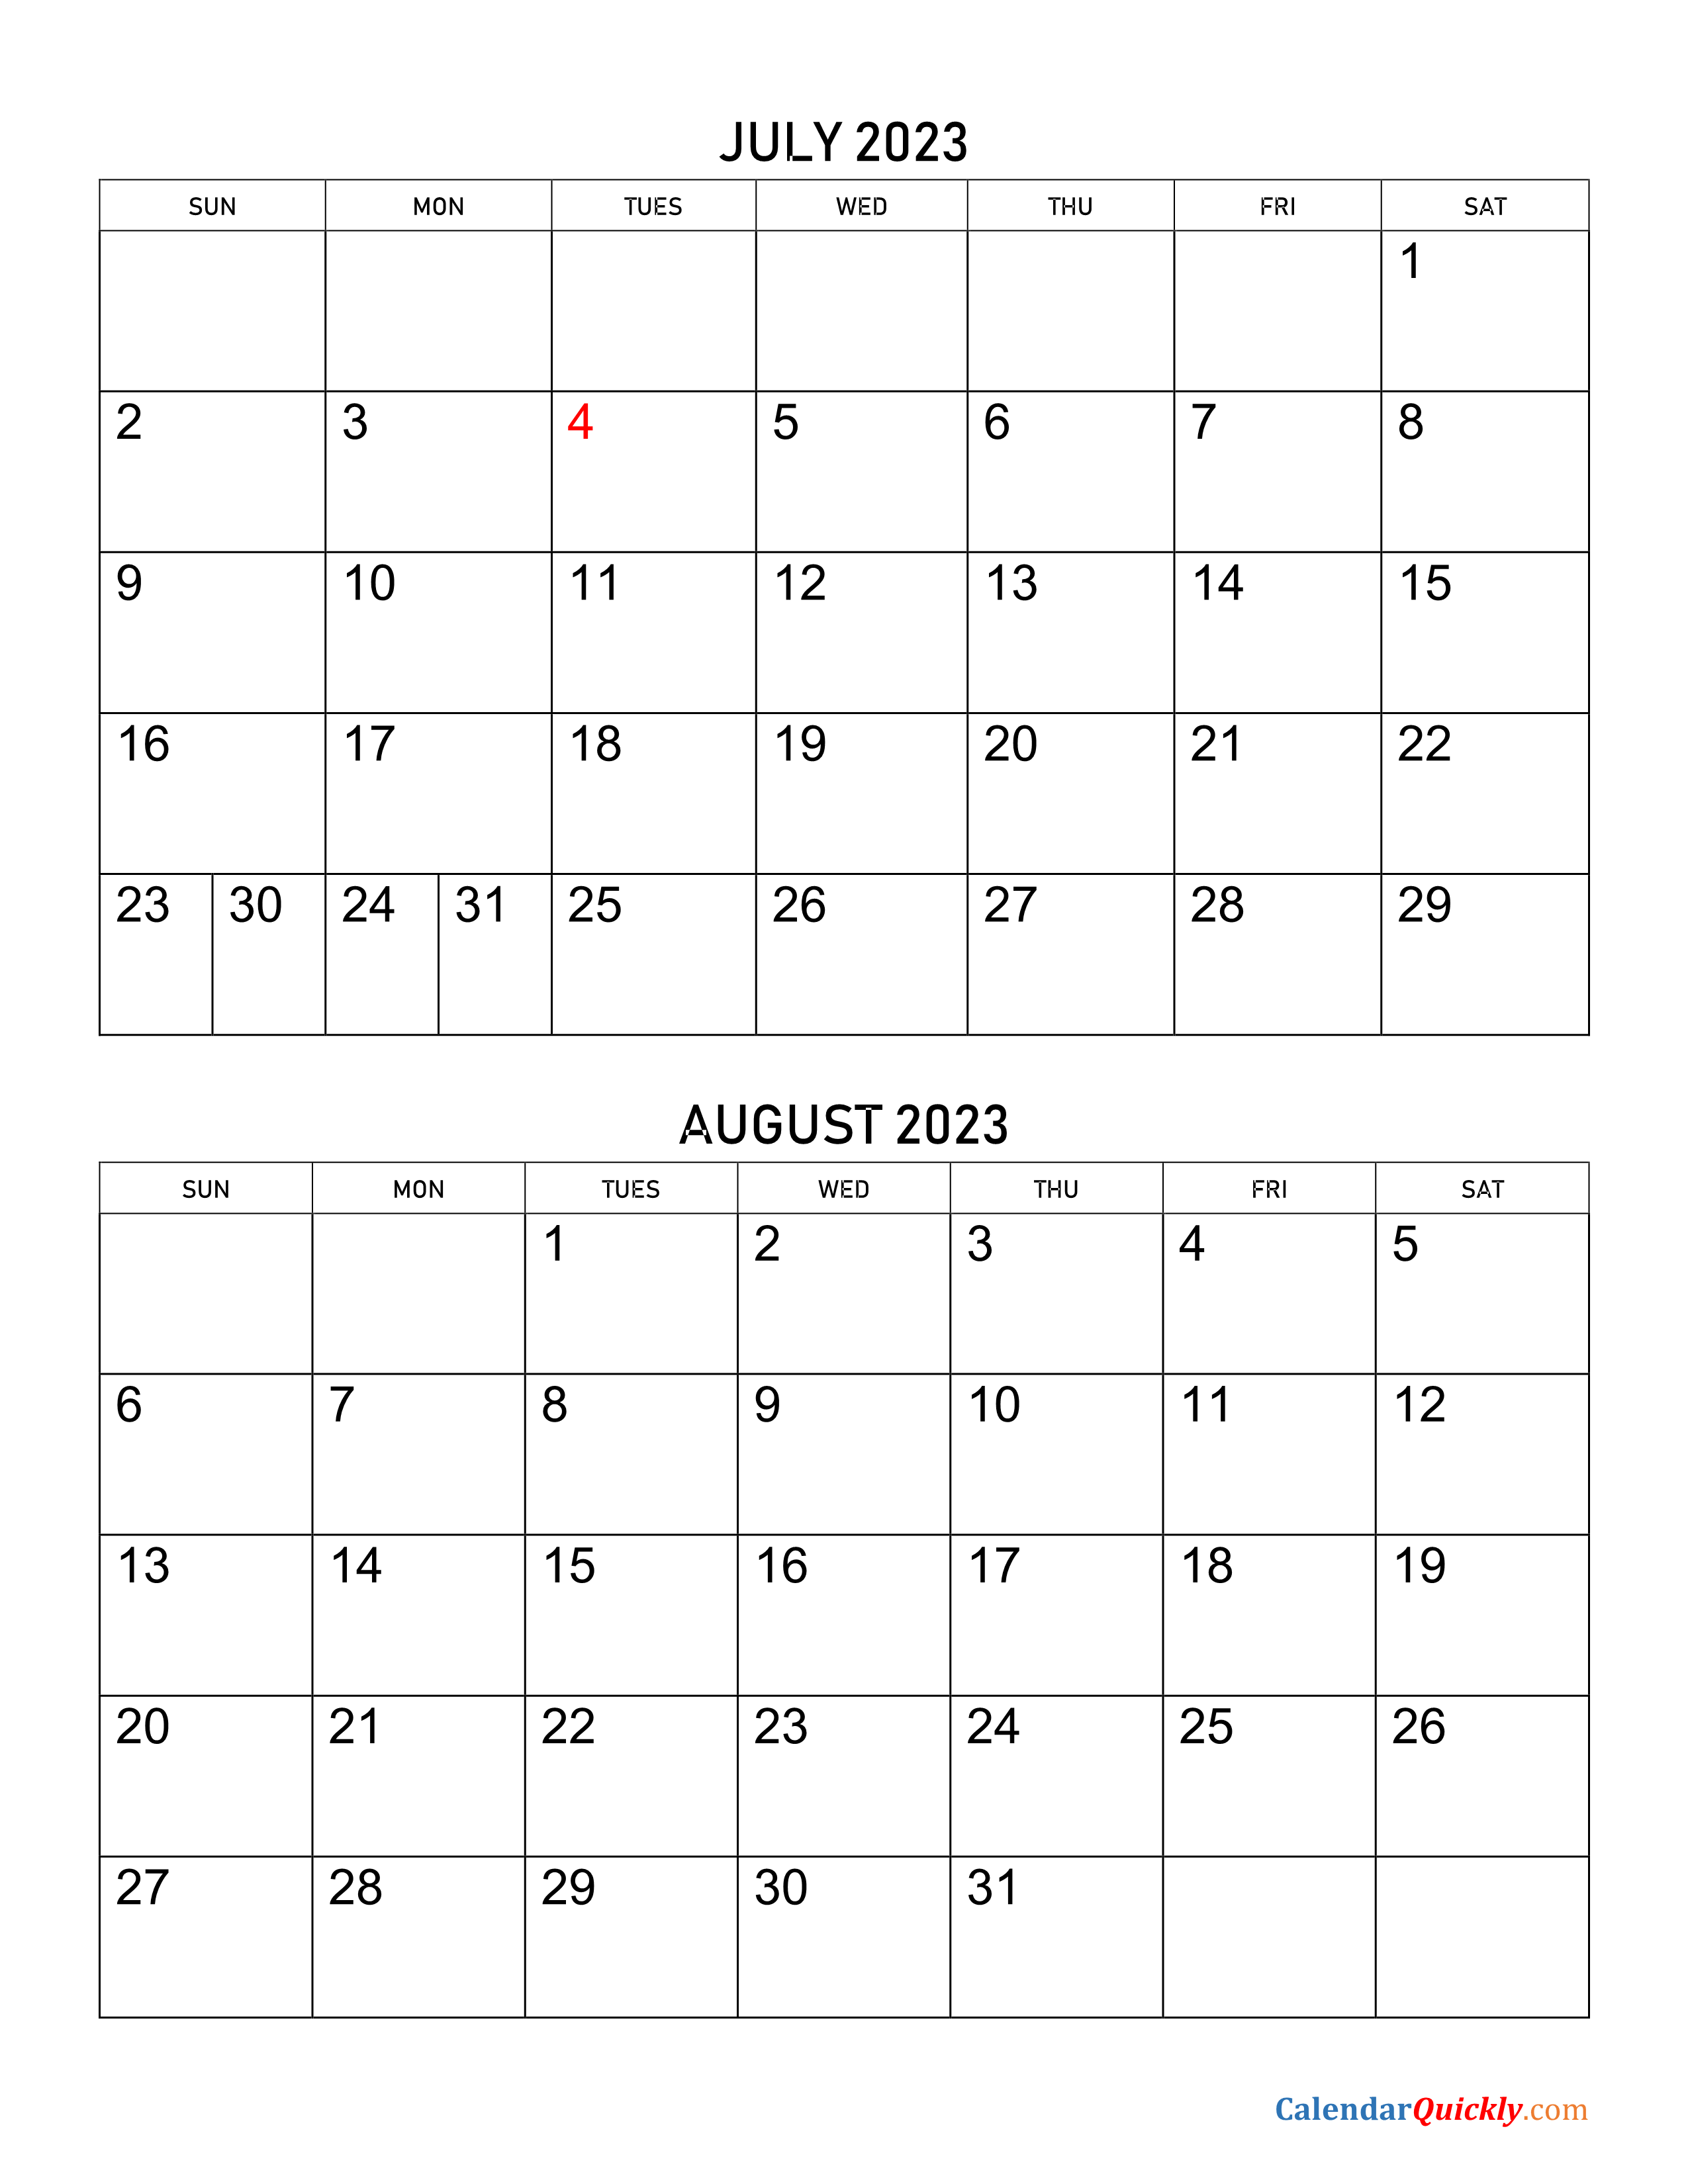 july-and-august-2023-calendar-calendar-quickly